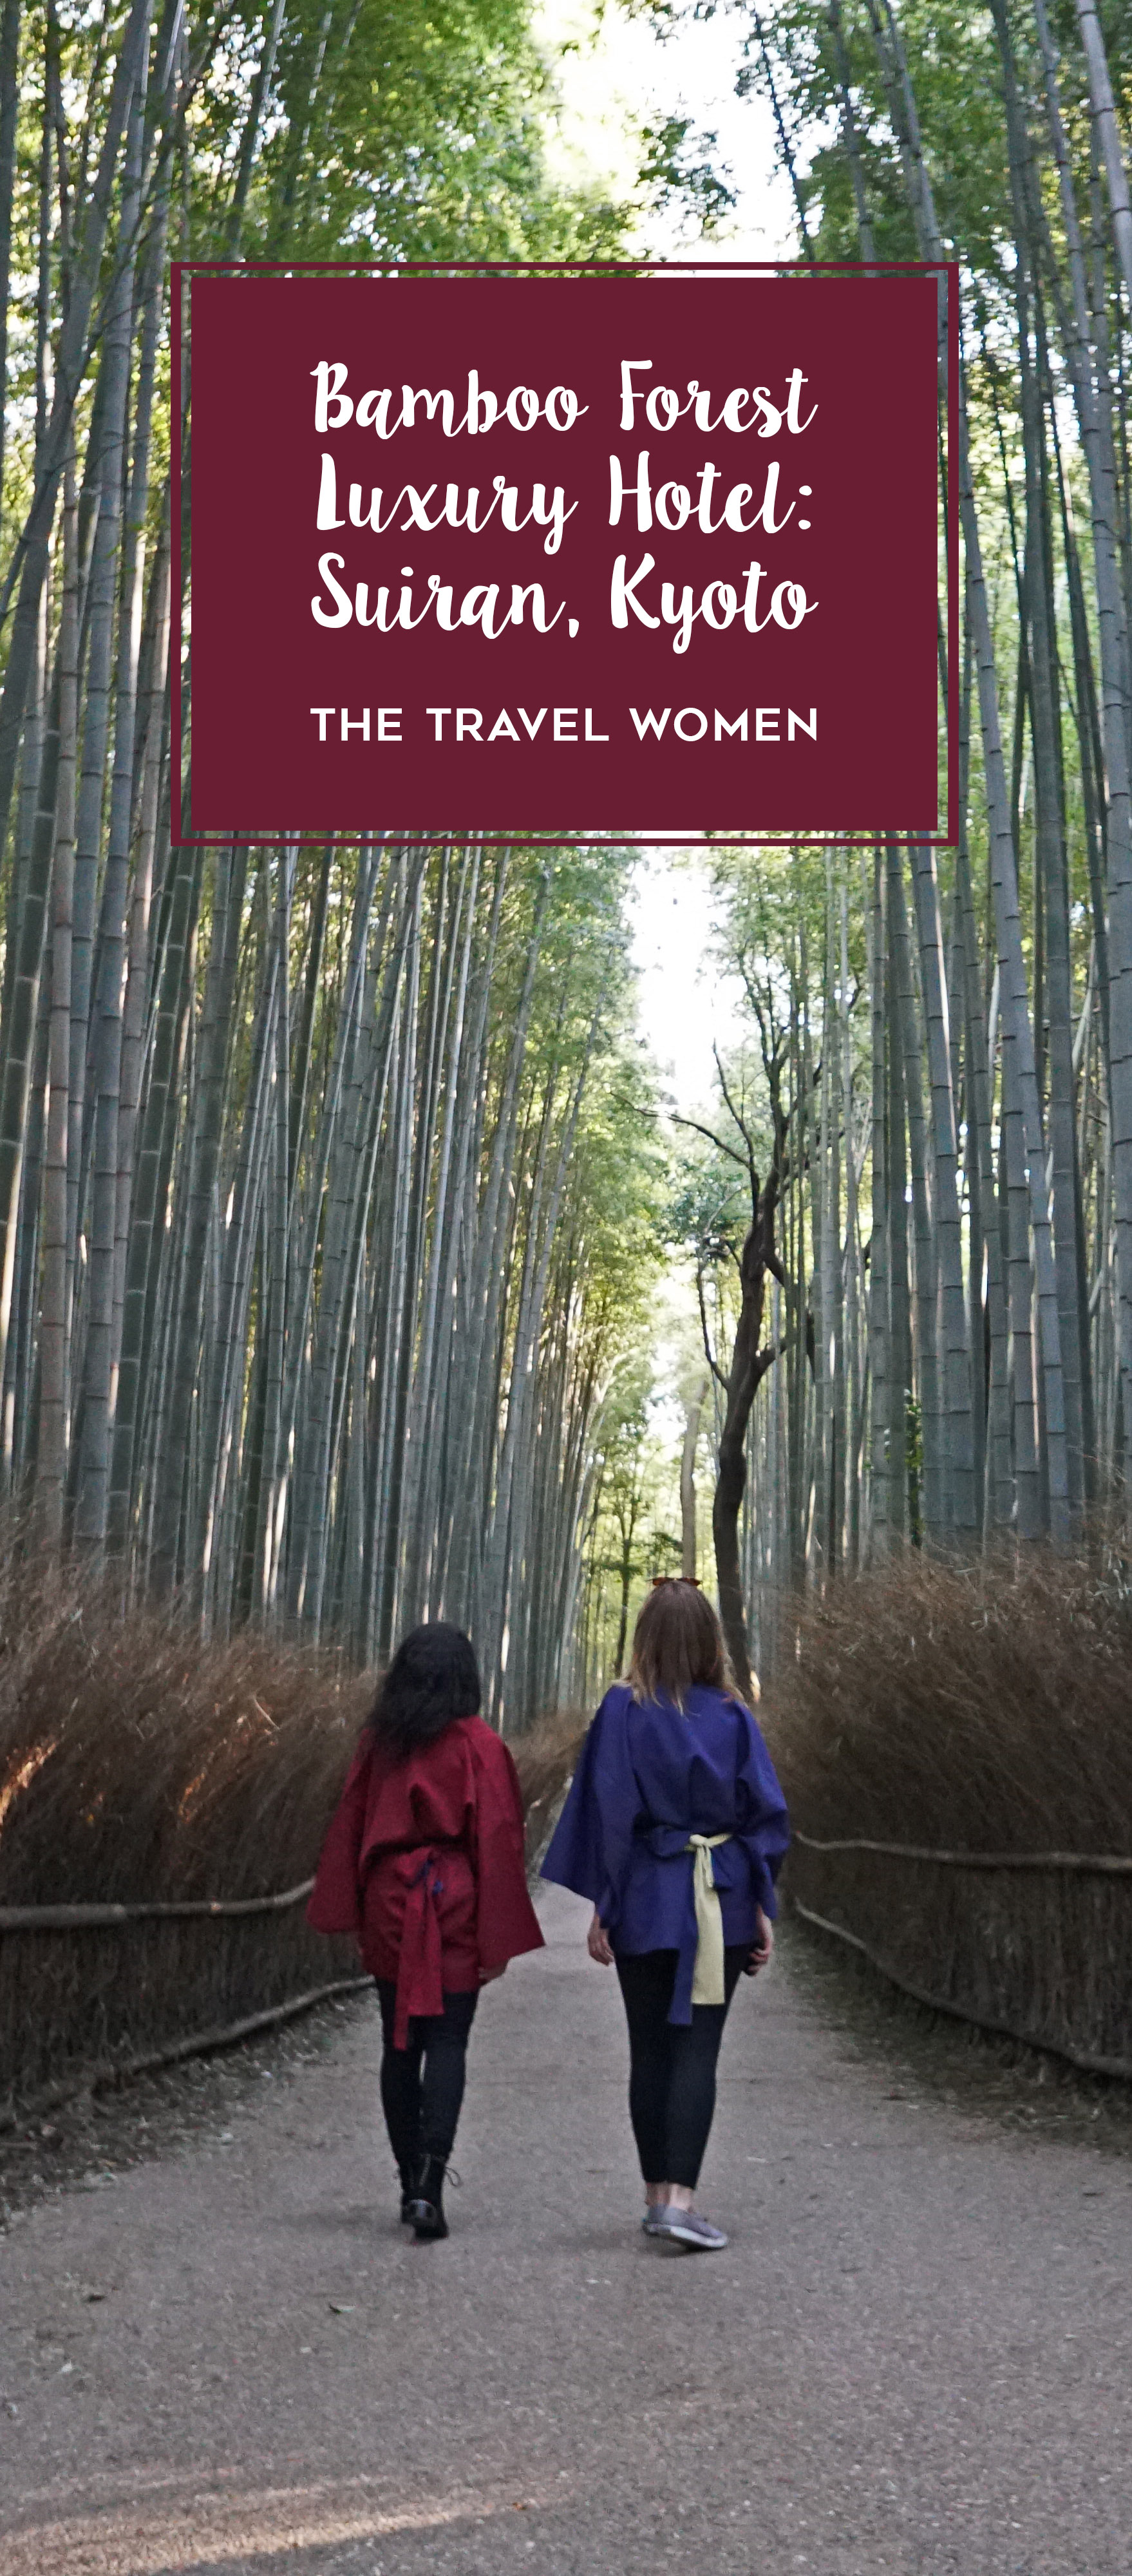 Suiran Kyoto title on image of two women in the bamboo forest 